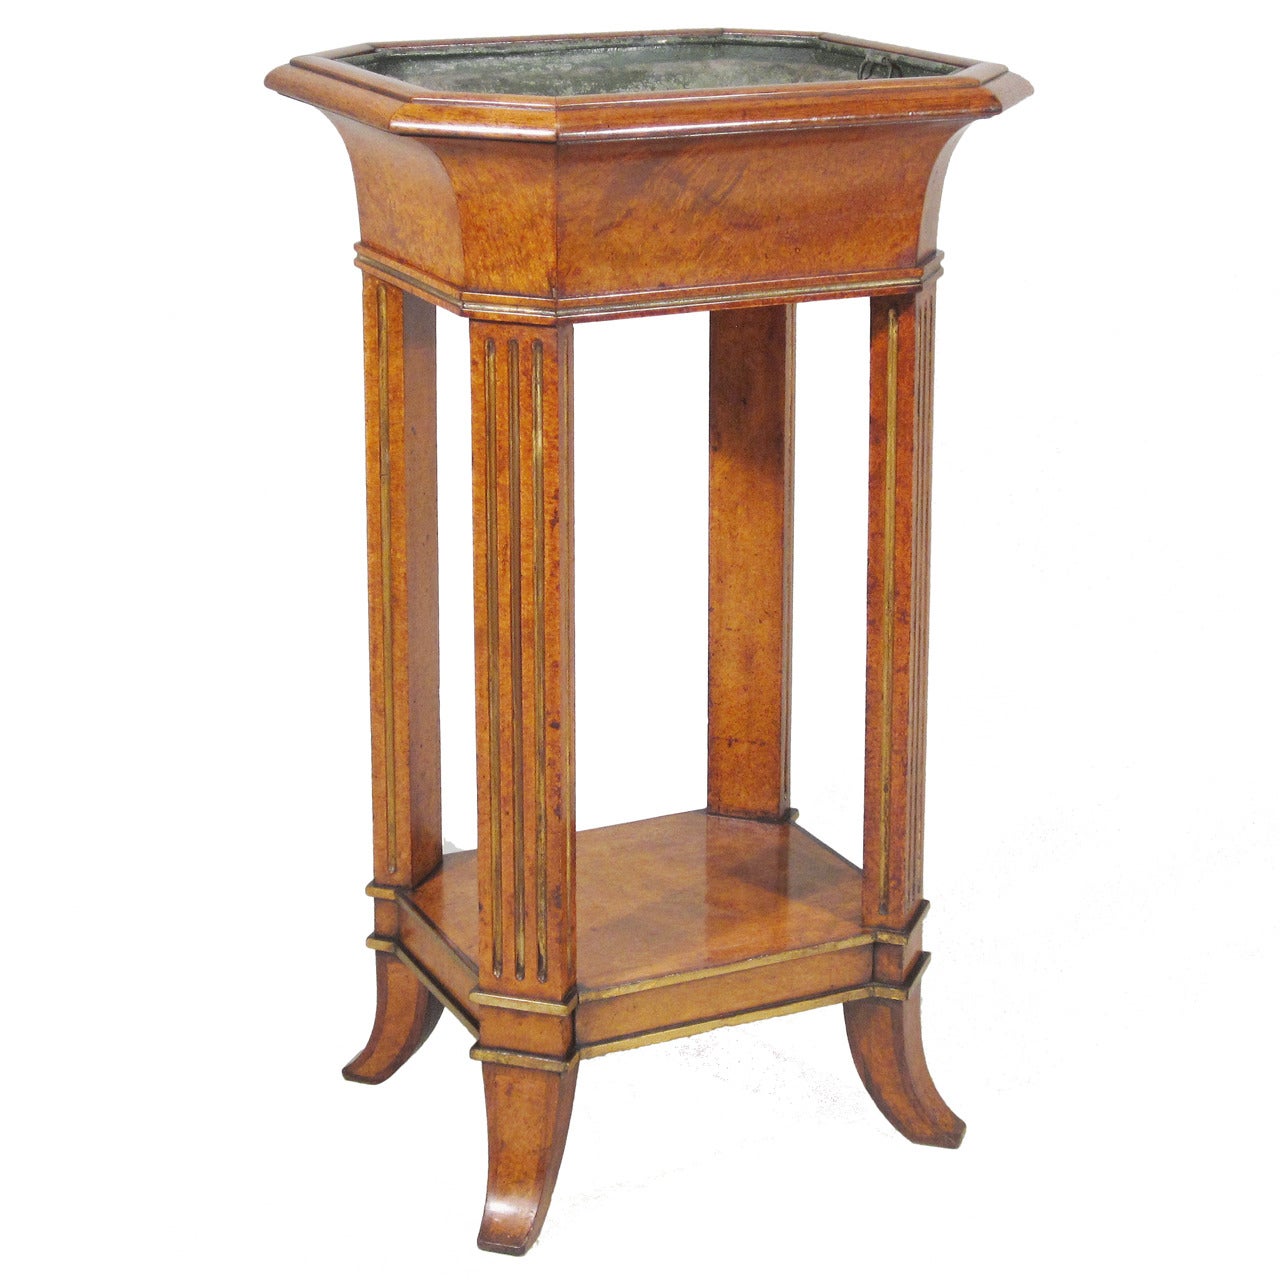 Antique Regency Period Amboyna and Padouk Jardiniere Stand For Sale